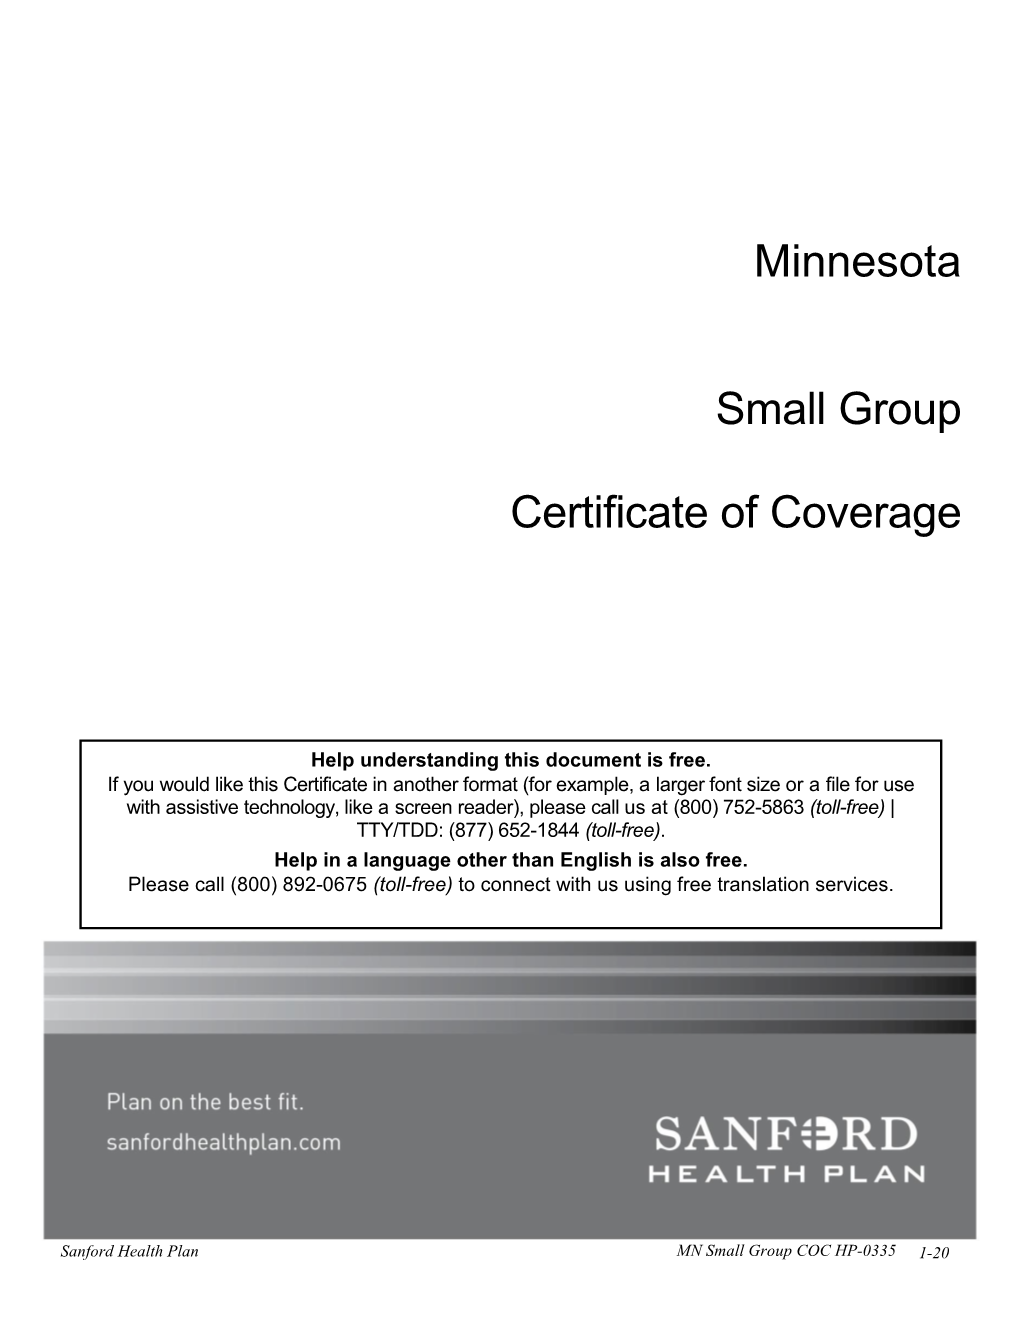 Minnesota Small Group Certificate of Coverage